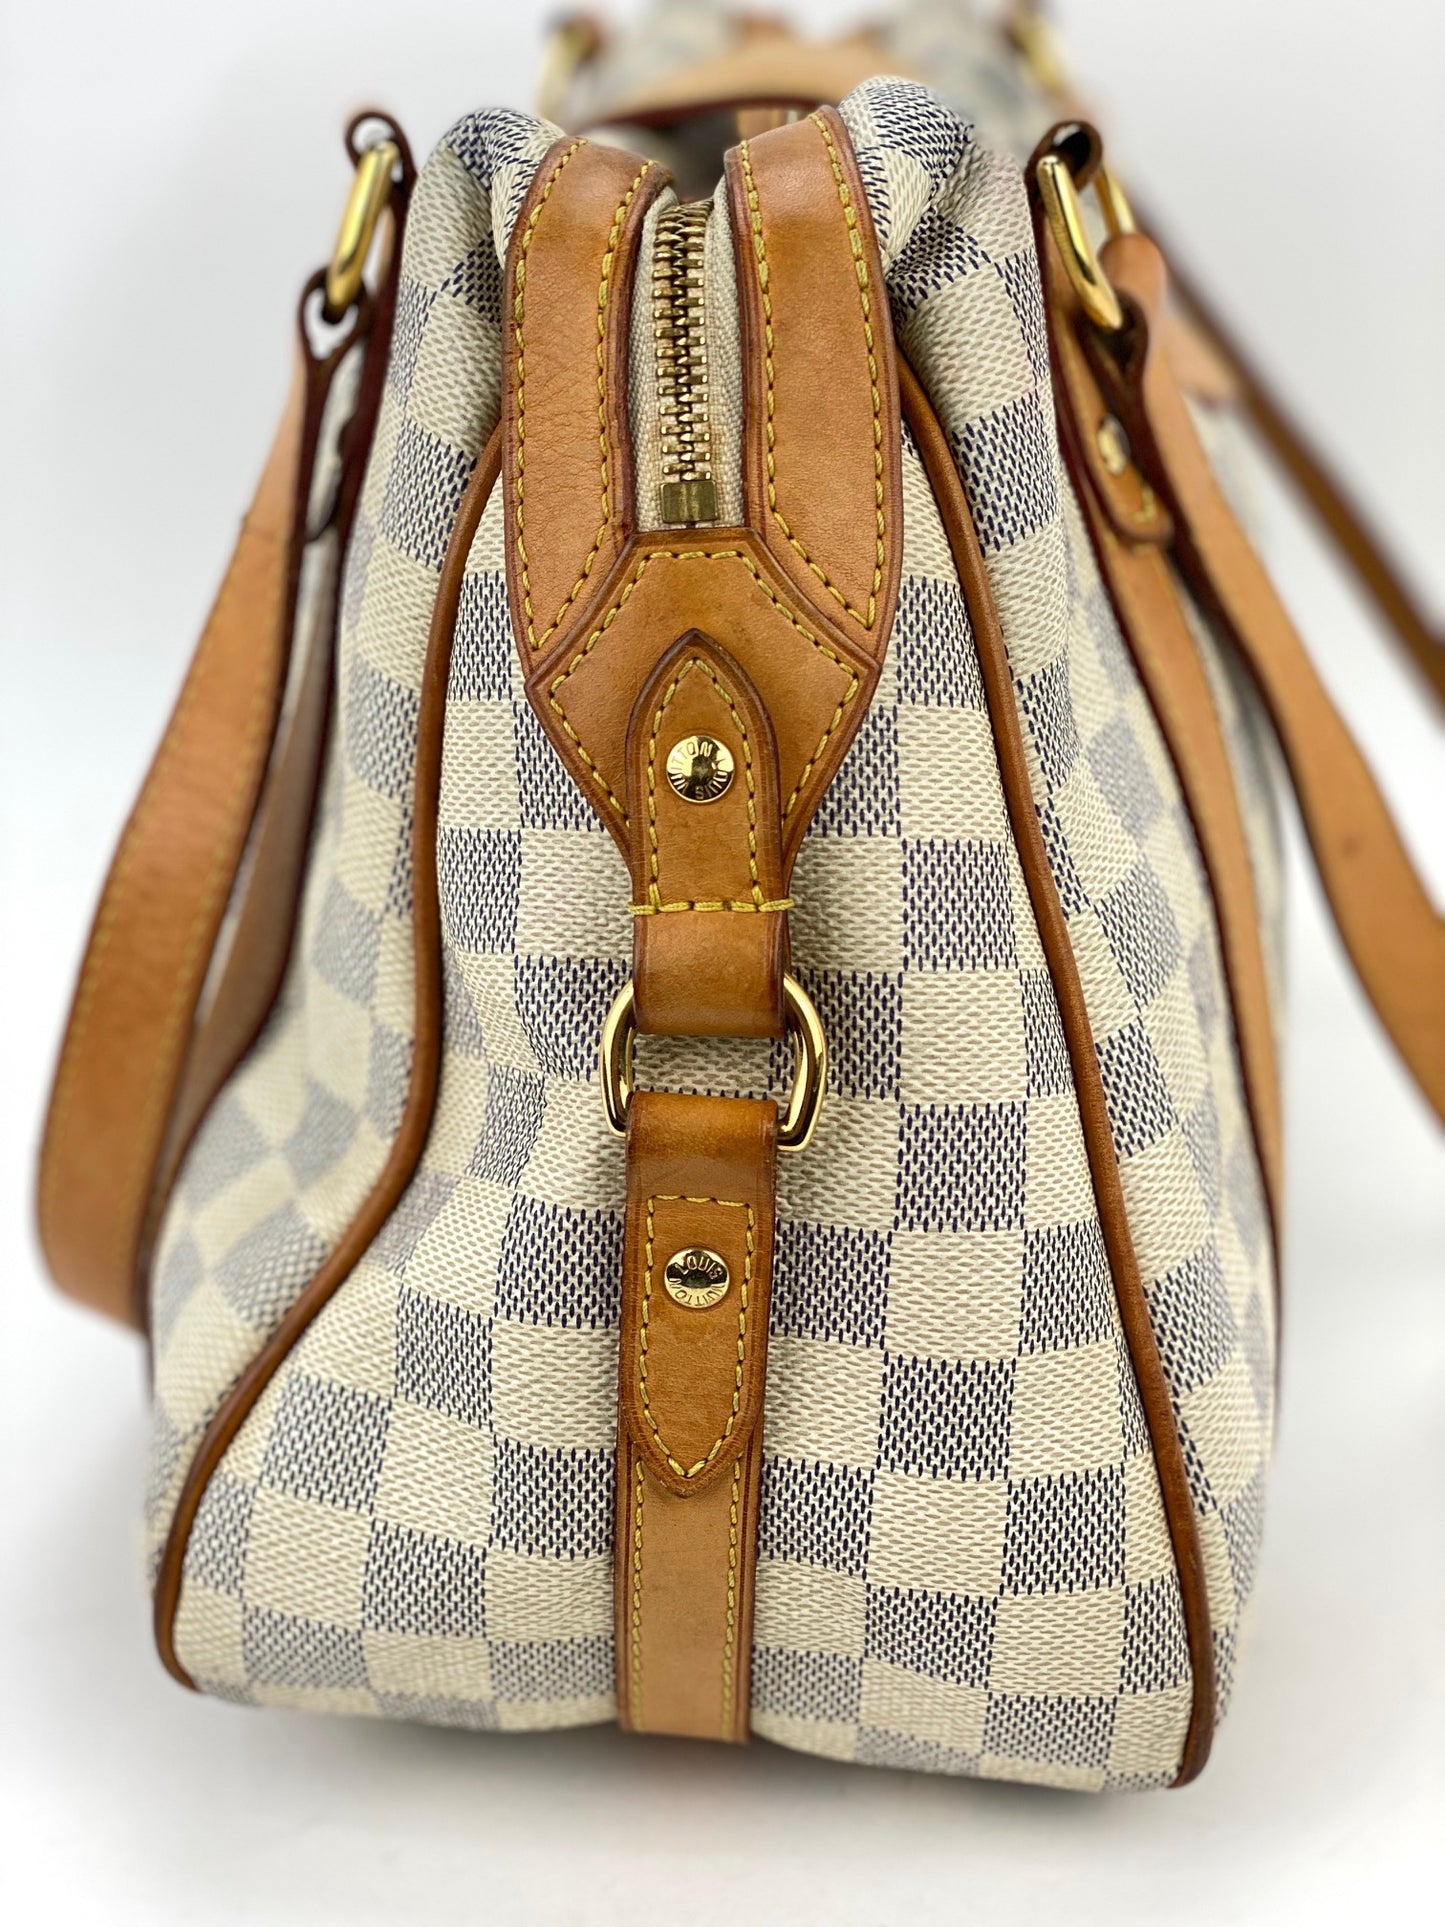 Bring N Buy on Instagram: Louis Vuitton Stresa Damier Azur PM All items  are authentic and we are not affiliated with any brands we sell